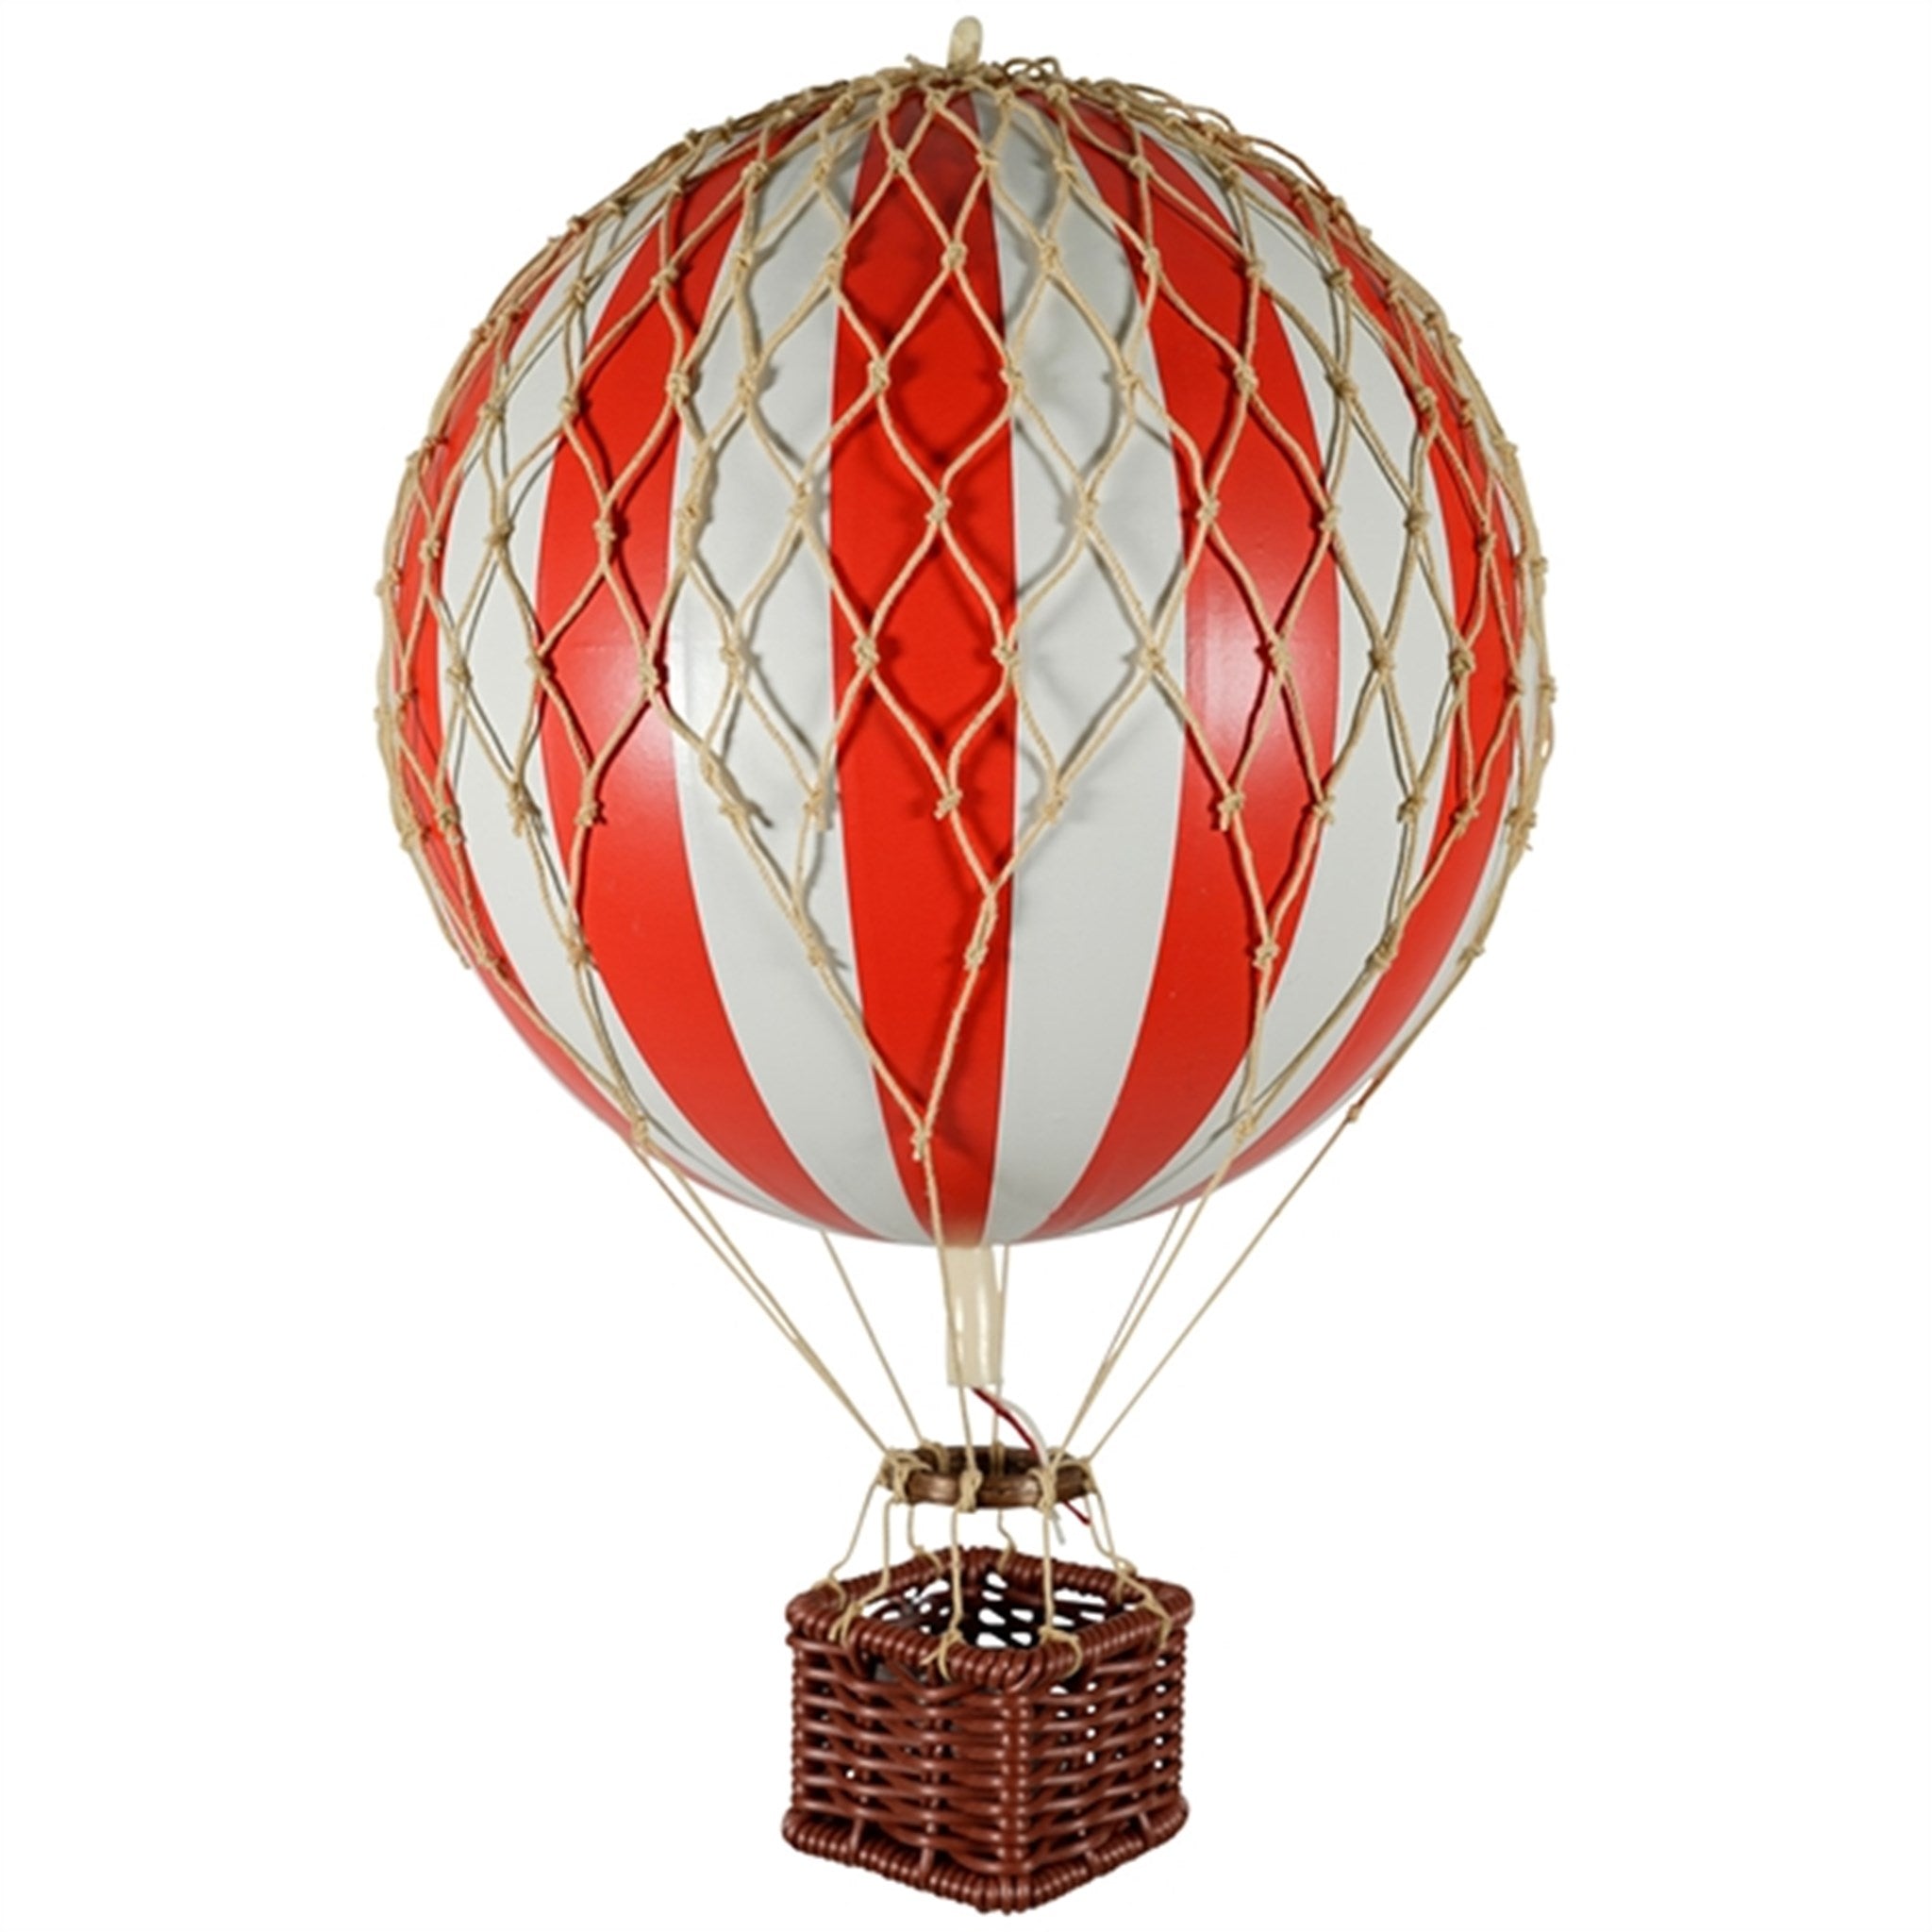 Authentic Models Balloon Red/White 18 cm